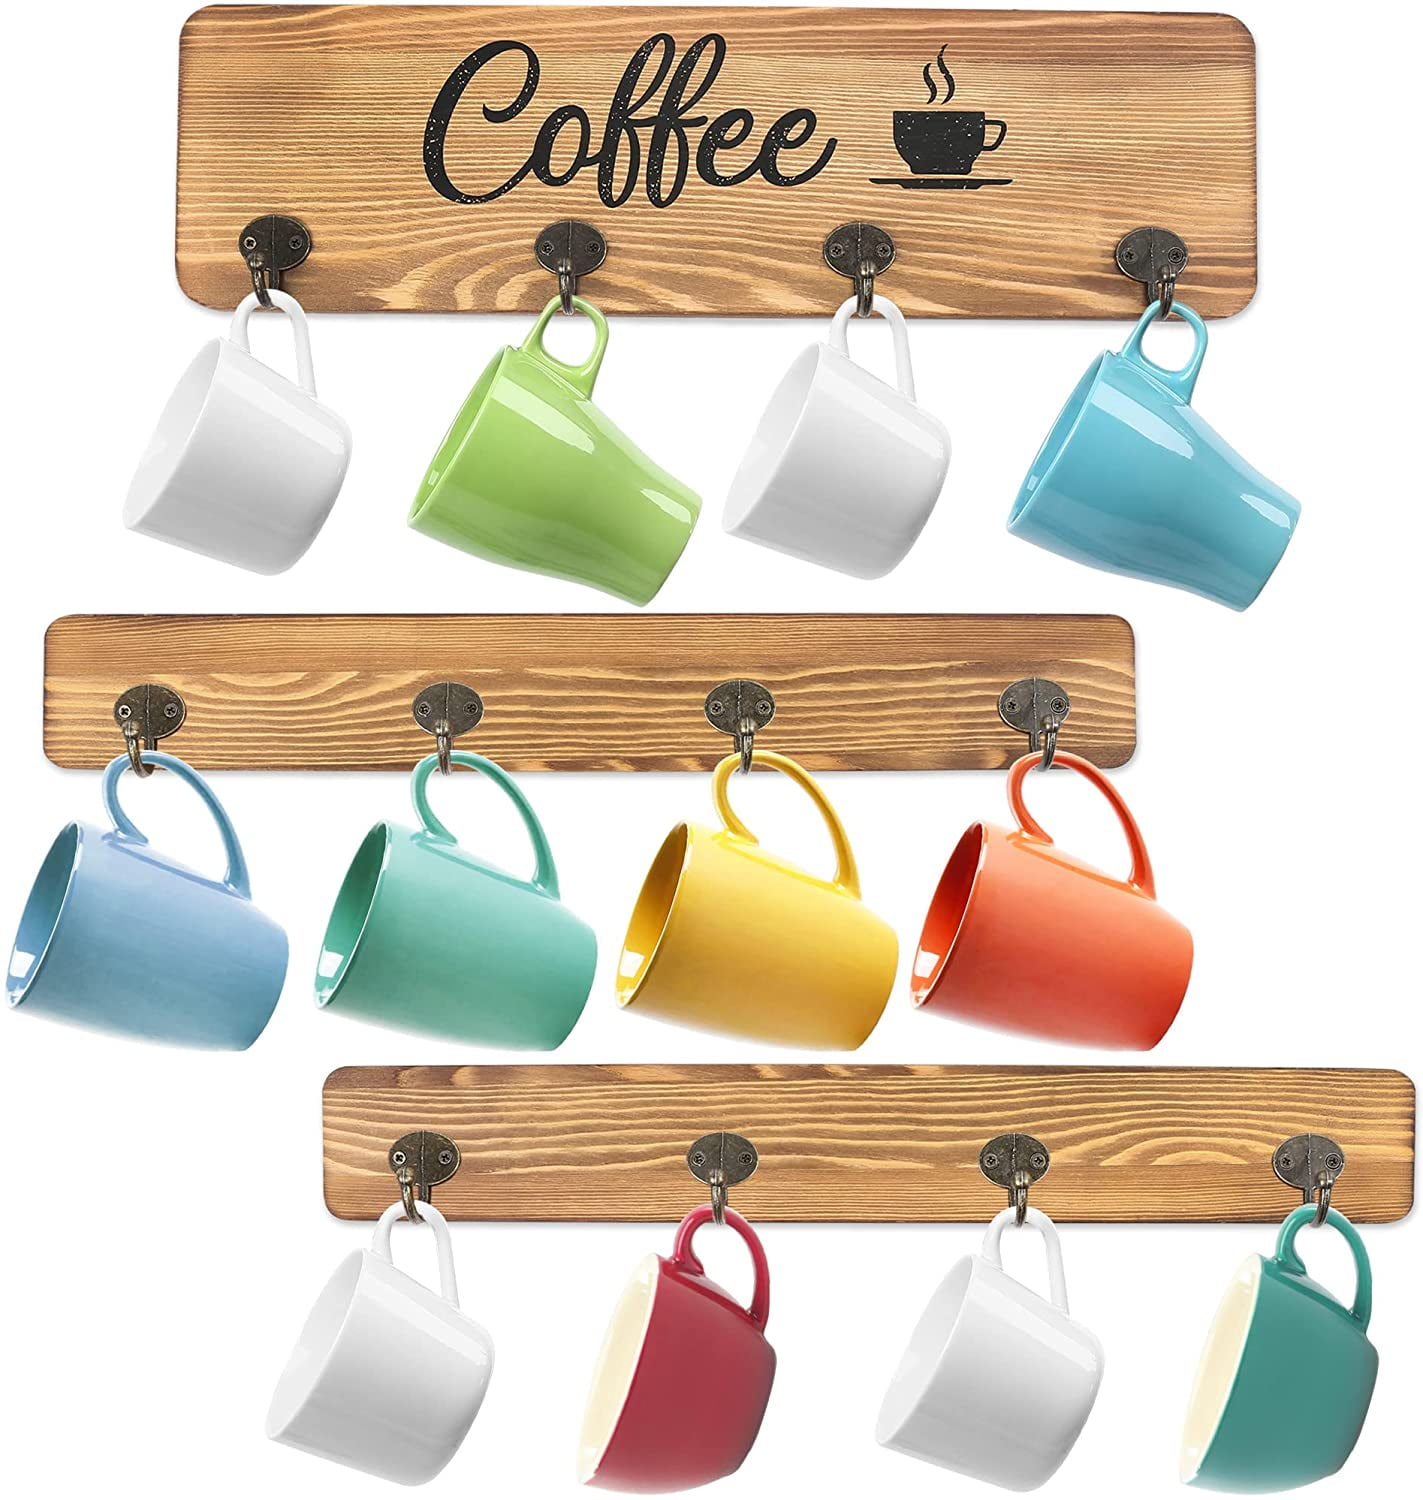 Details about   Coffee Decor Kitchen Wall Mounted Coffee Bar Mug Cup Rack Holder Display Sign 